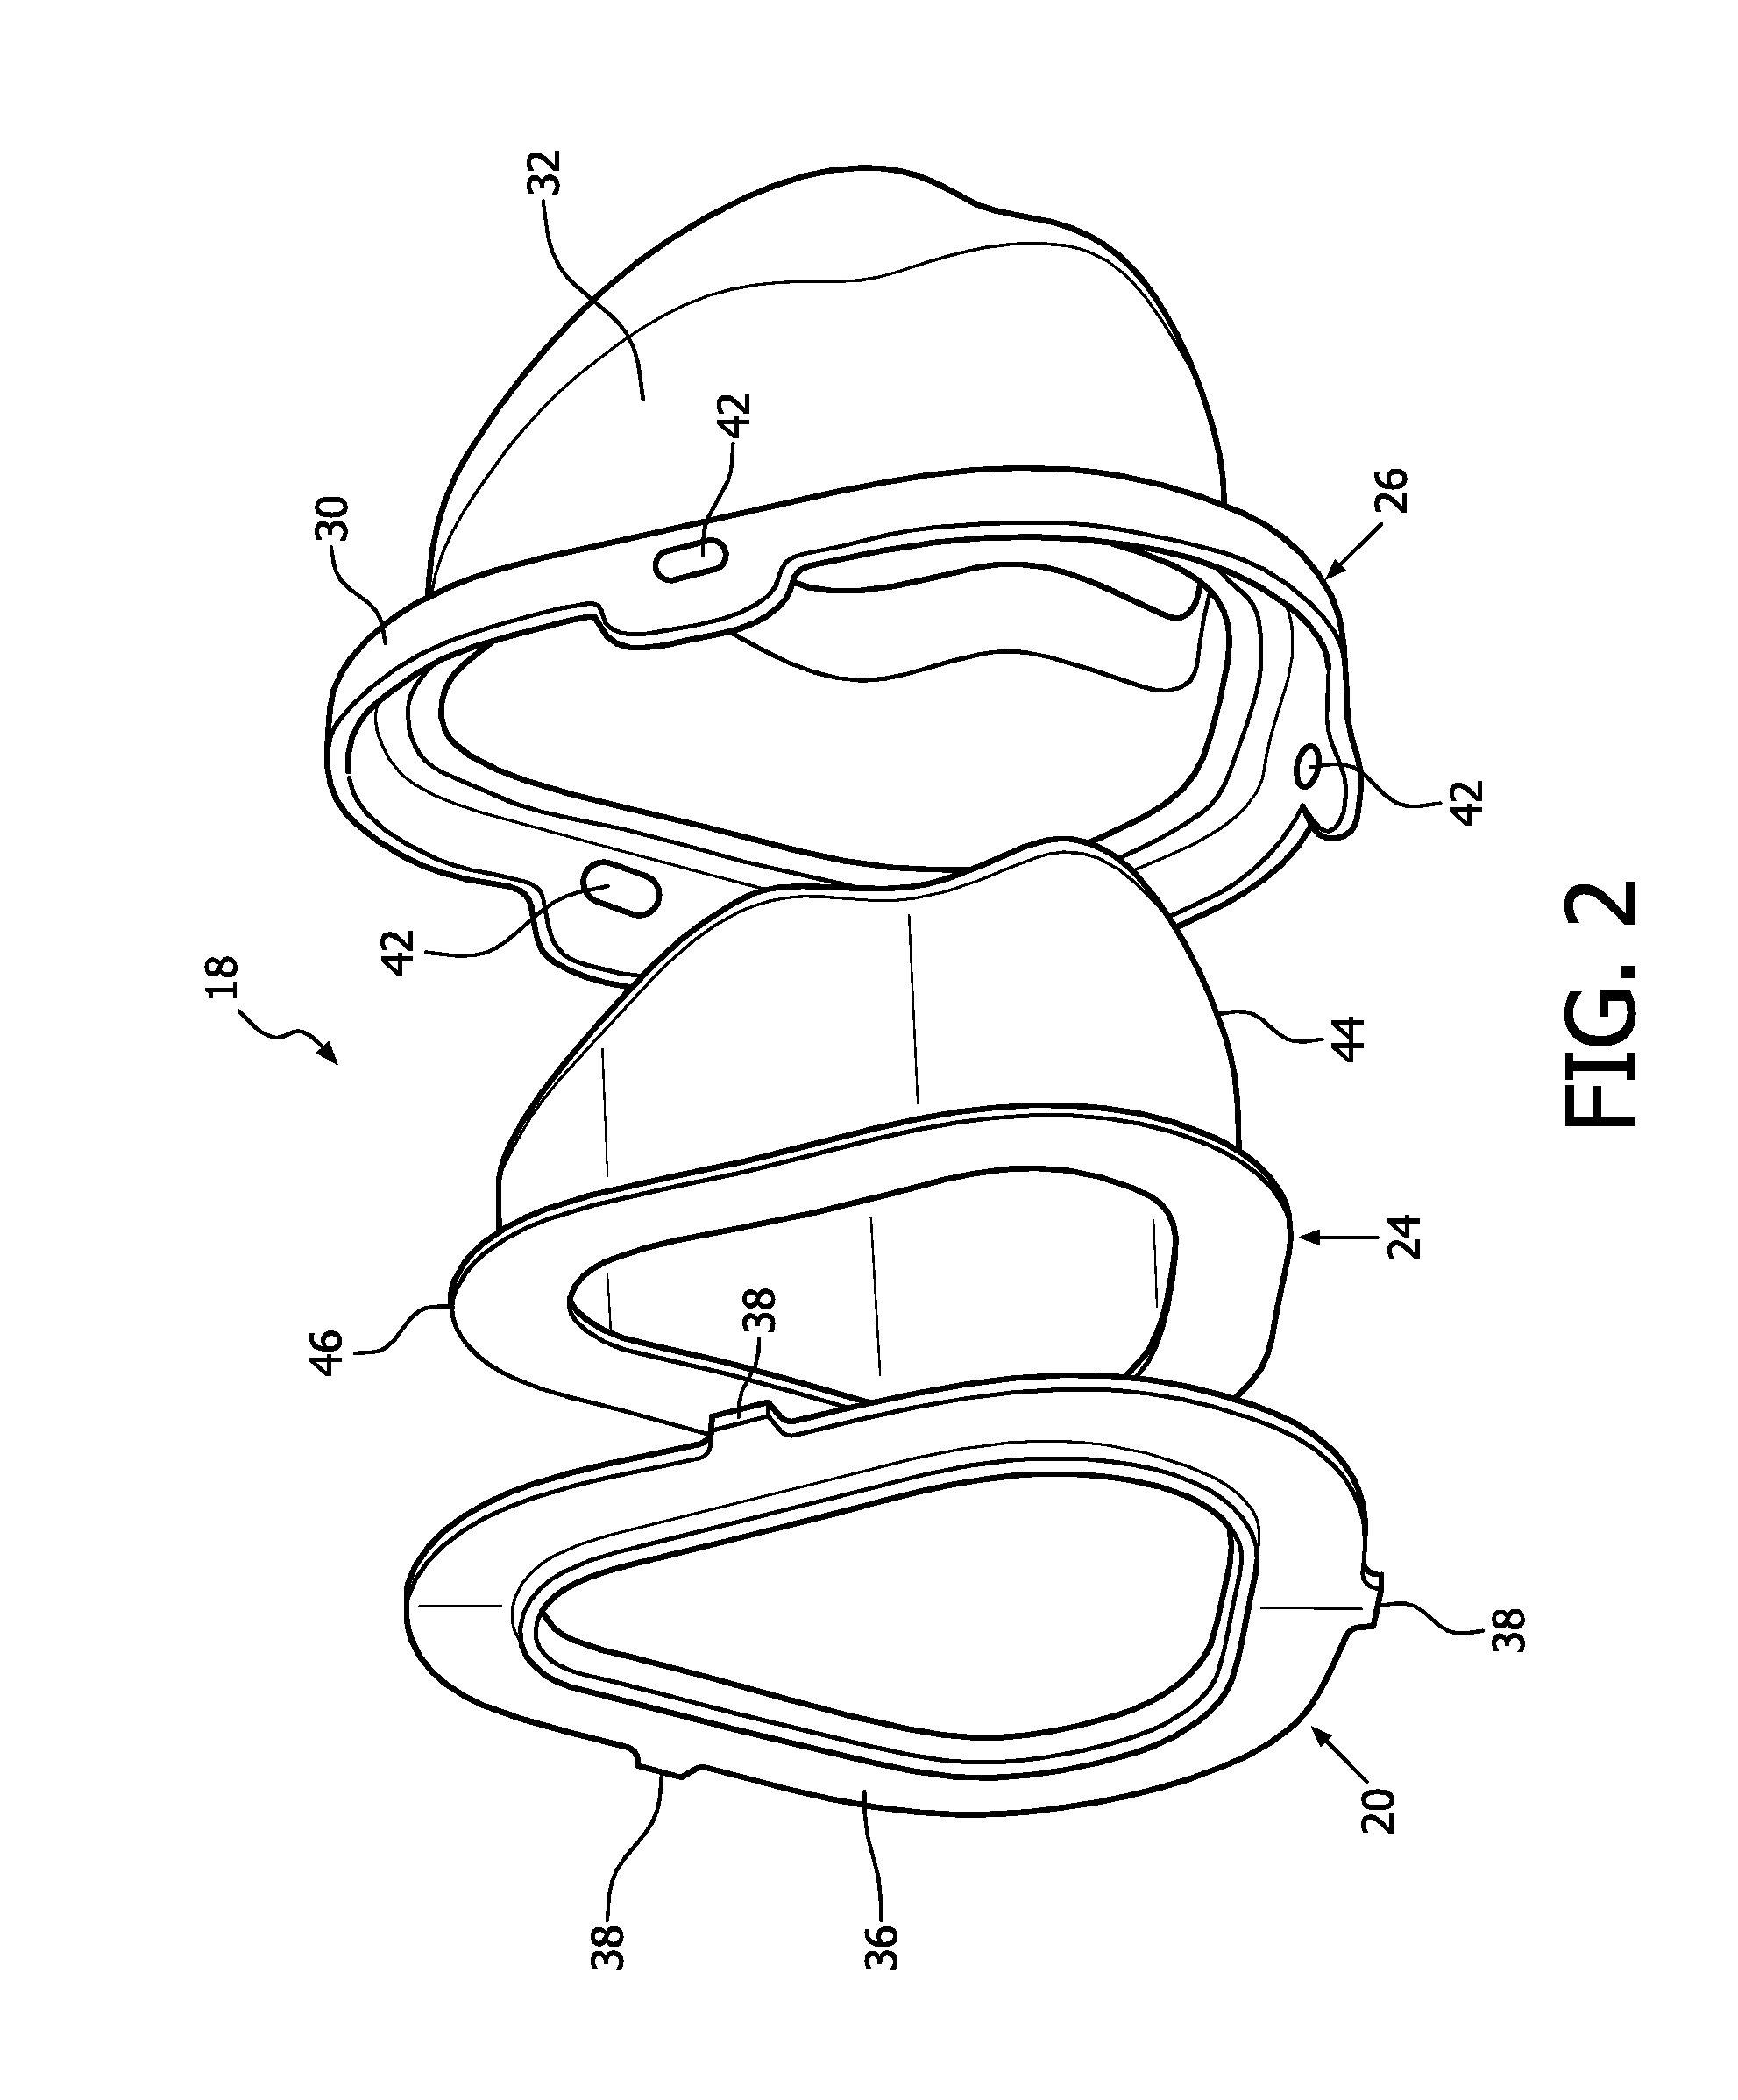 Facial mask with custom-manufactured cushion element, and associated method